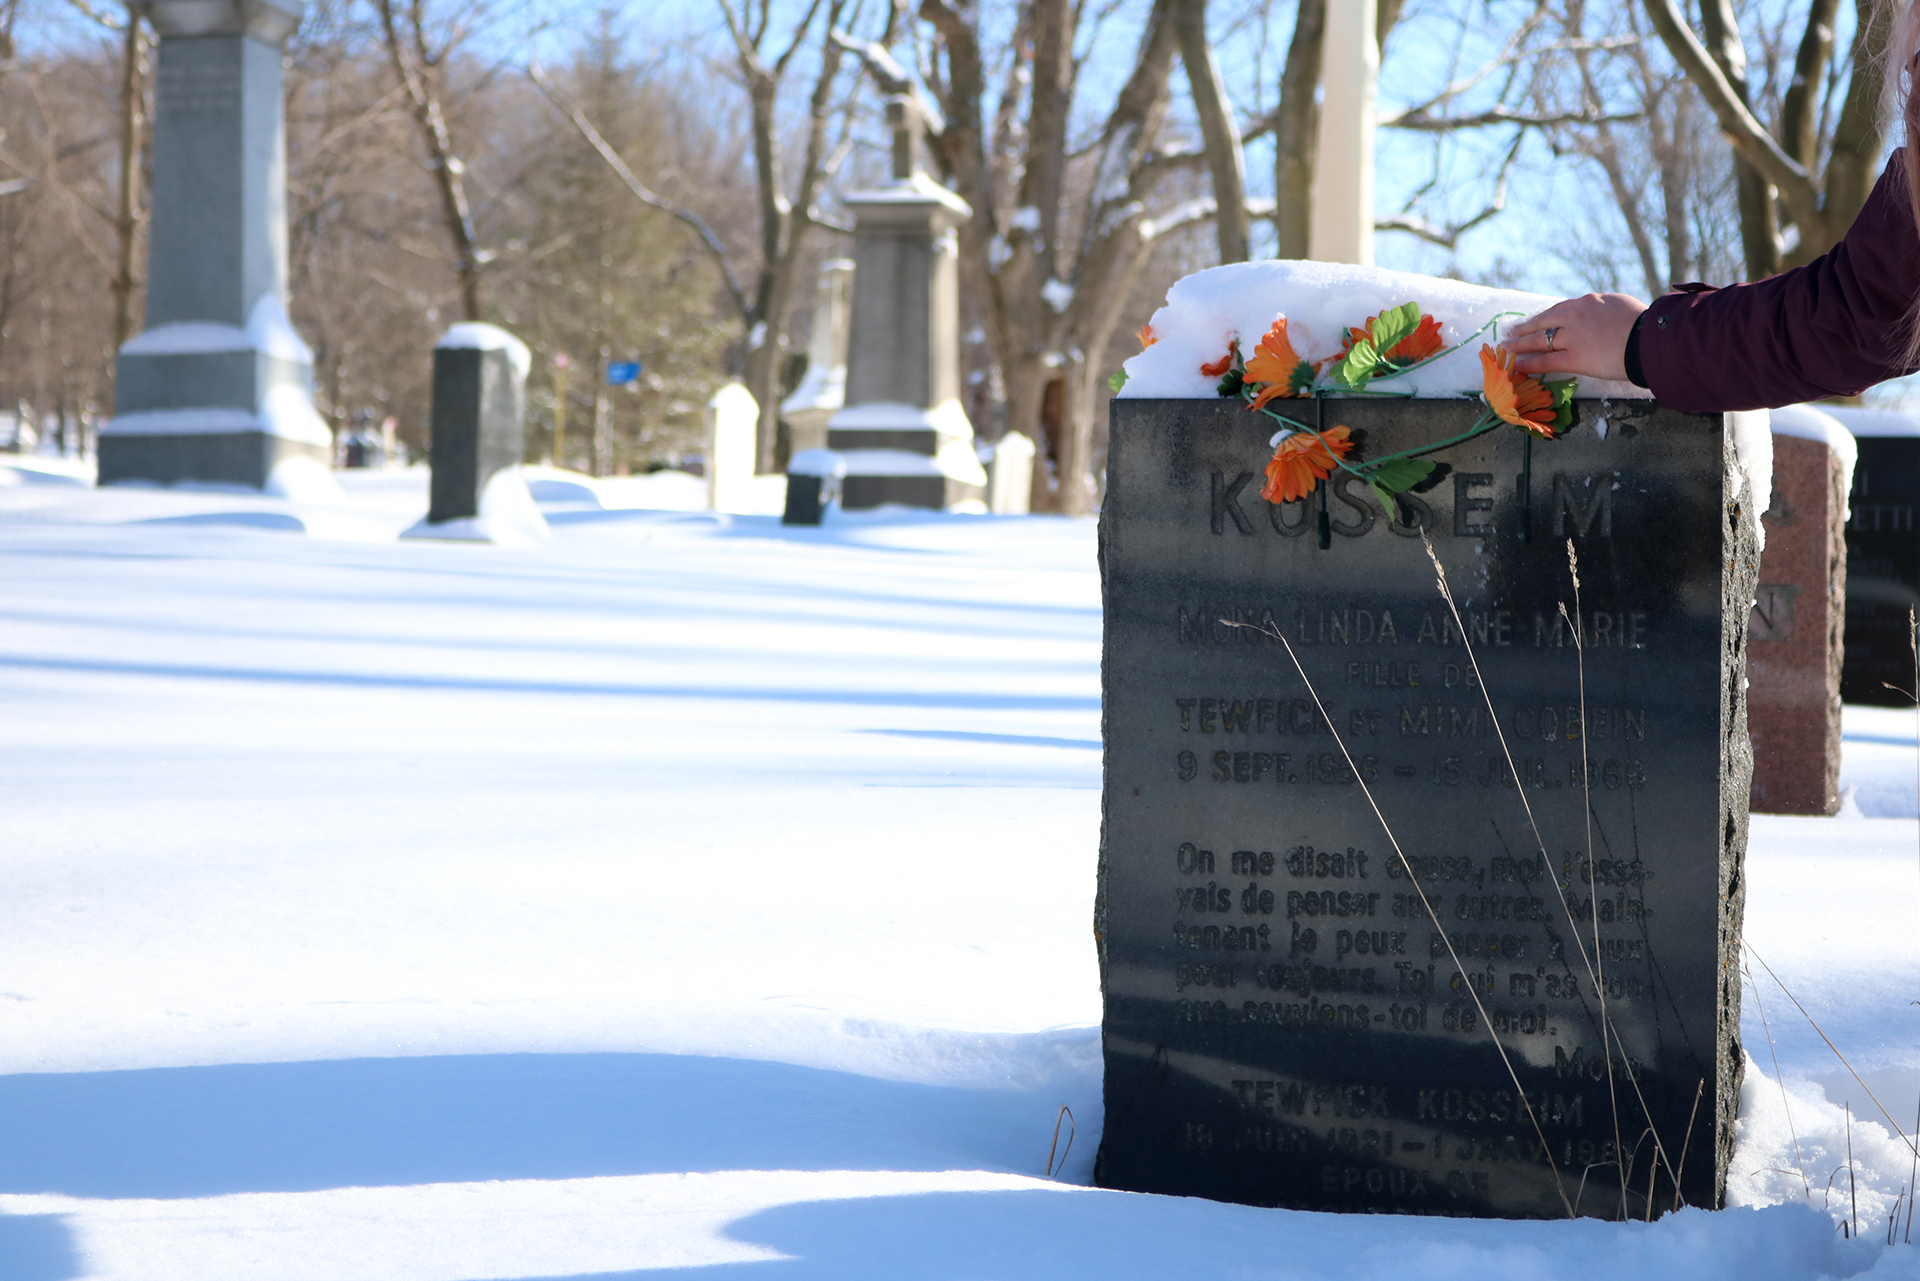 Person touches gravestone with orange flowers.